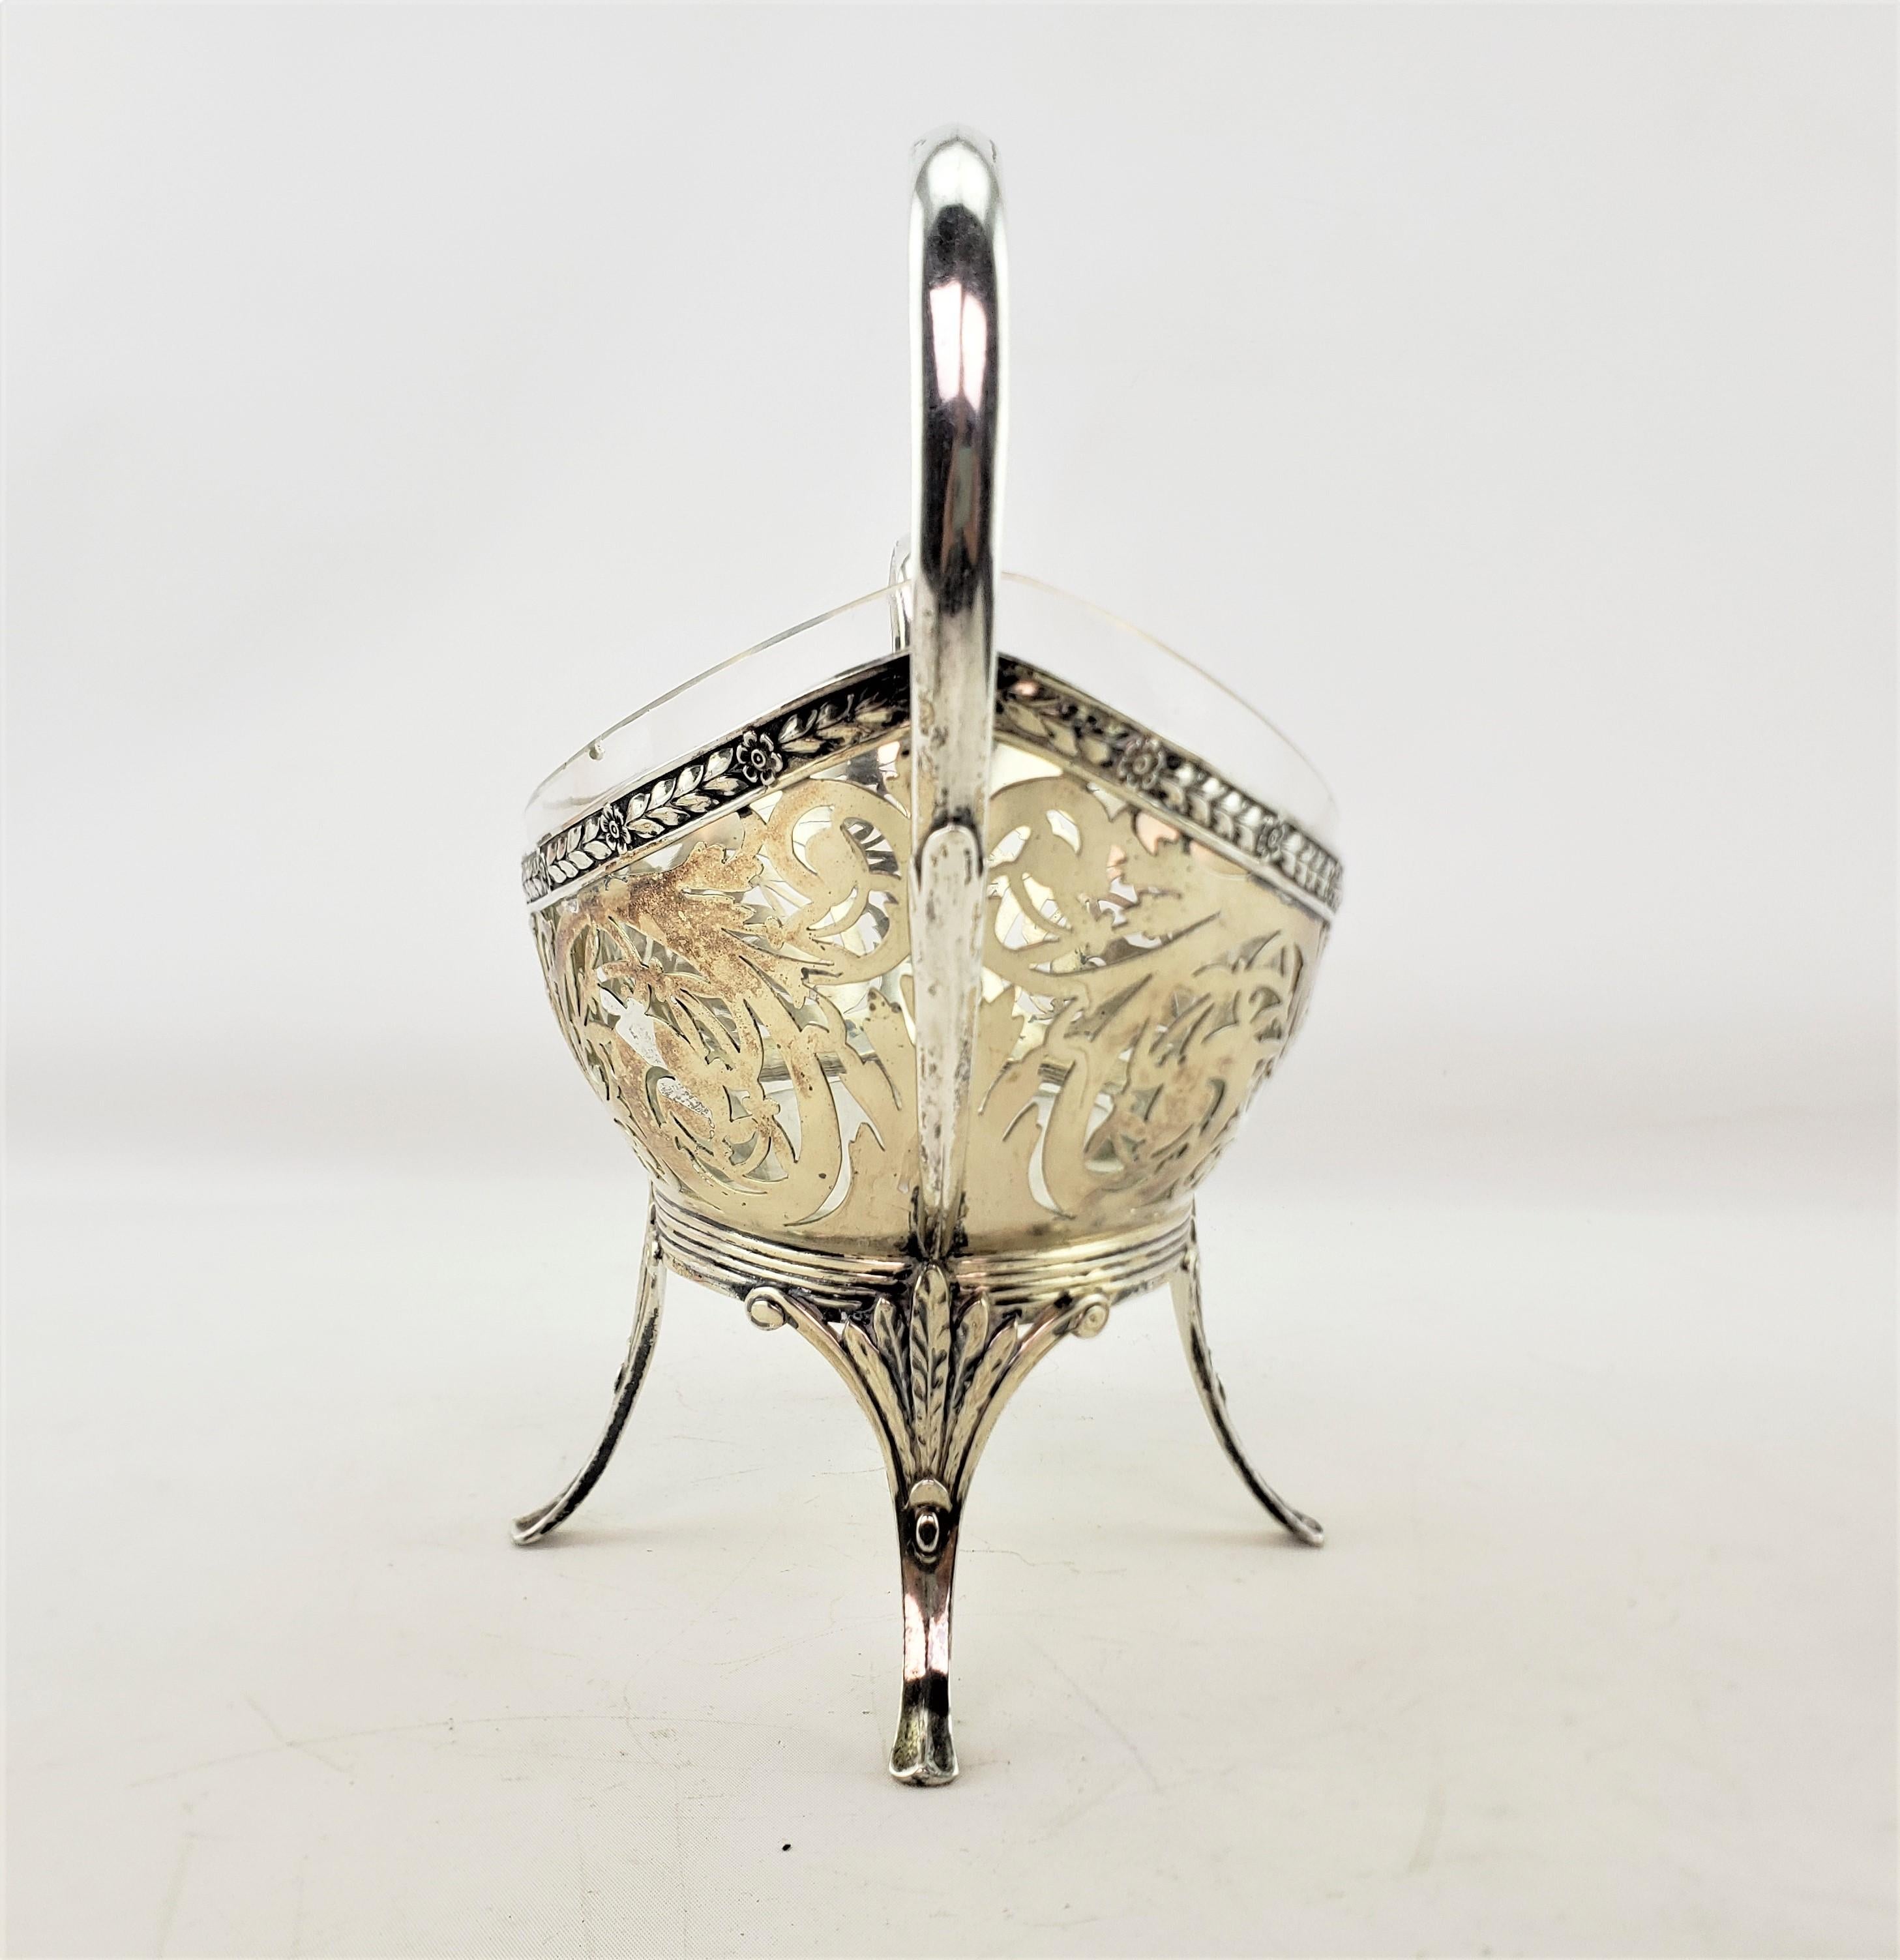 Machine-Made Antique German .800 Silver & Crystal Lined & Footed Basket or Centerpiece For Sale